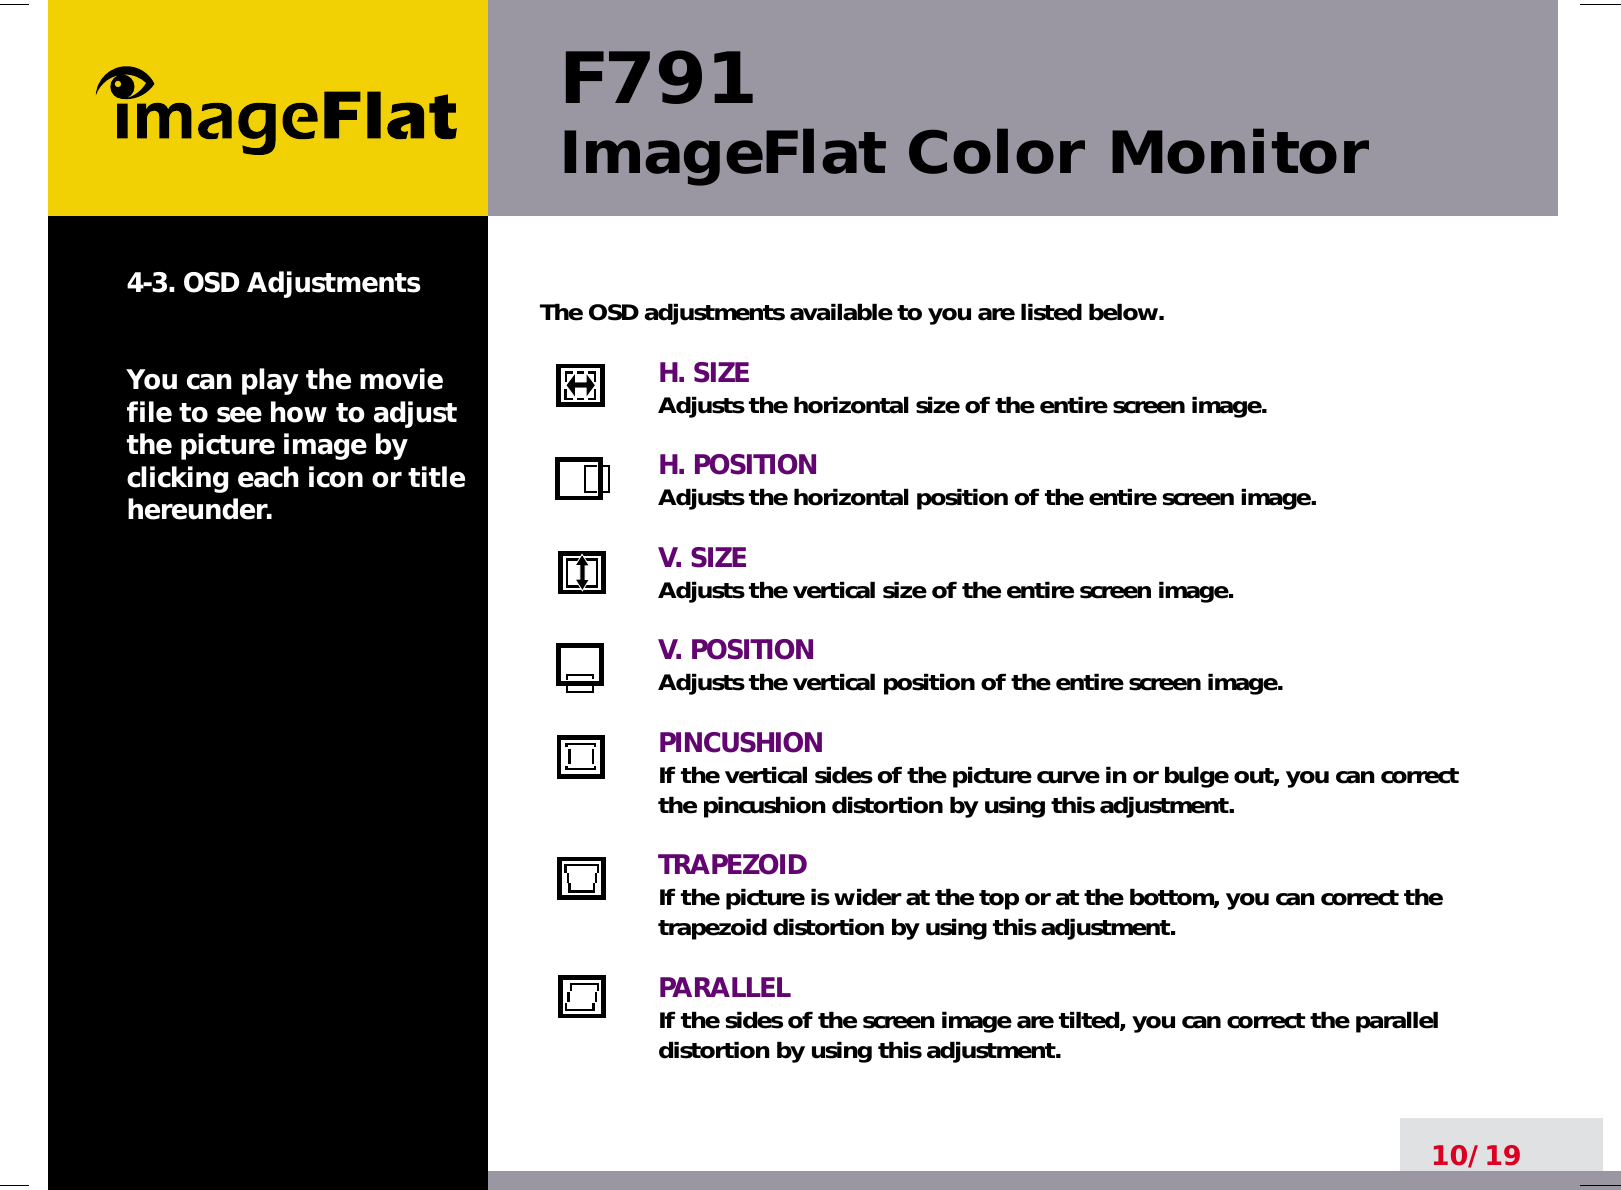 F791ImageFlat Color Monitor10/194-3. OSD AdjustmentsYou can play the moviefile to see how to adjustthe picture image byclicking each icon or titlehereunder.The OSD adjustments available to you are listed below.H. SIZEAdjusts the horizontal size of the entire screen image.H. POSITIONAdjusts the horizontal position of the entire screen image.V. SIZEAdjusts the vertical size of the entire screen image.V. POSITIONAdjusts the vertical position of the entire screen image.PINCUSHIONIf the vertical sides of the picture curve in or bulge out, you can correctthe pincushion distortion by using this adjustment.TRAPEZOIDIf the picture is wider at the top or at the bottom, you can correct thetrapezoid distortion by using this adjustment.PARALLELIf the sides of the screen image are tilted, you can correct the paralleldistortion by using this adjustment.